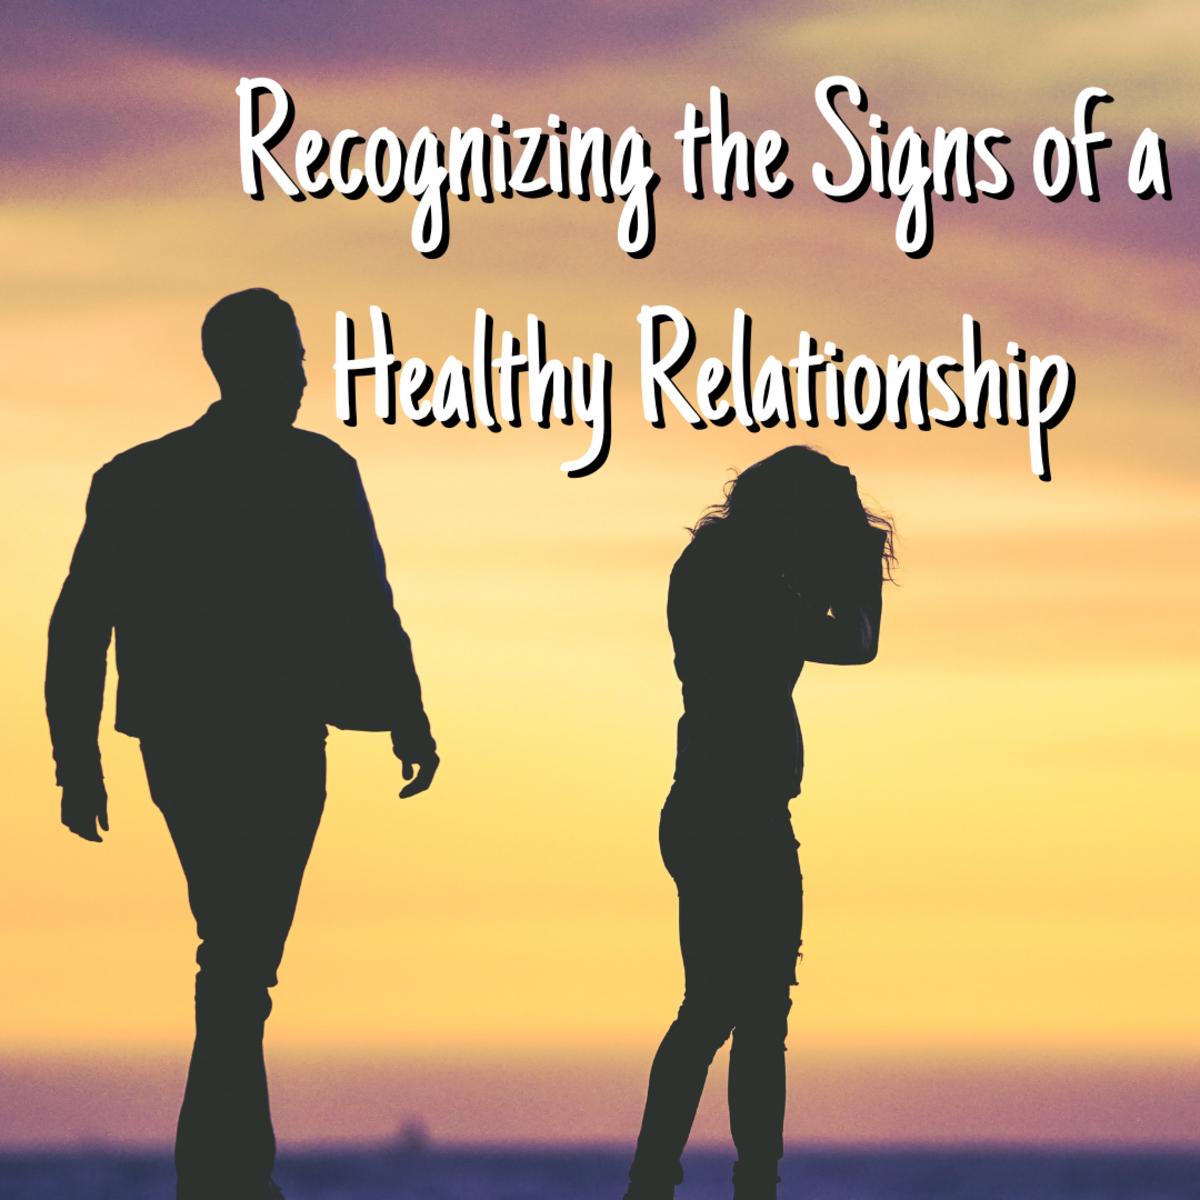 Do You Know the Signs of a Healthy Relationship?